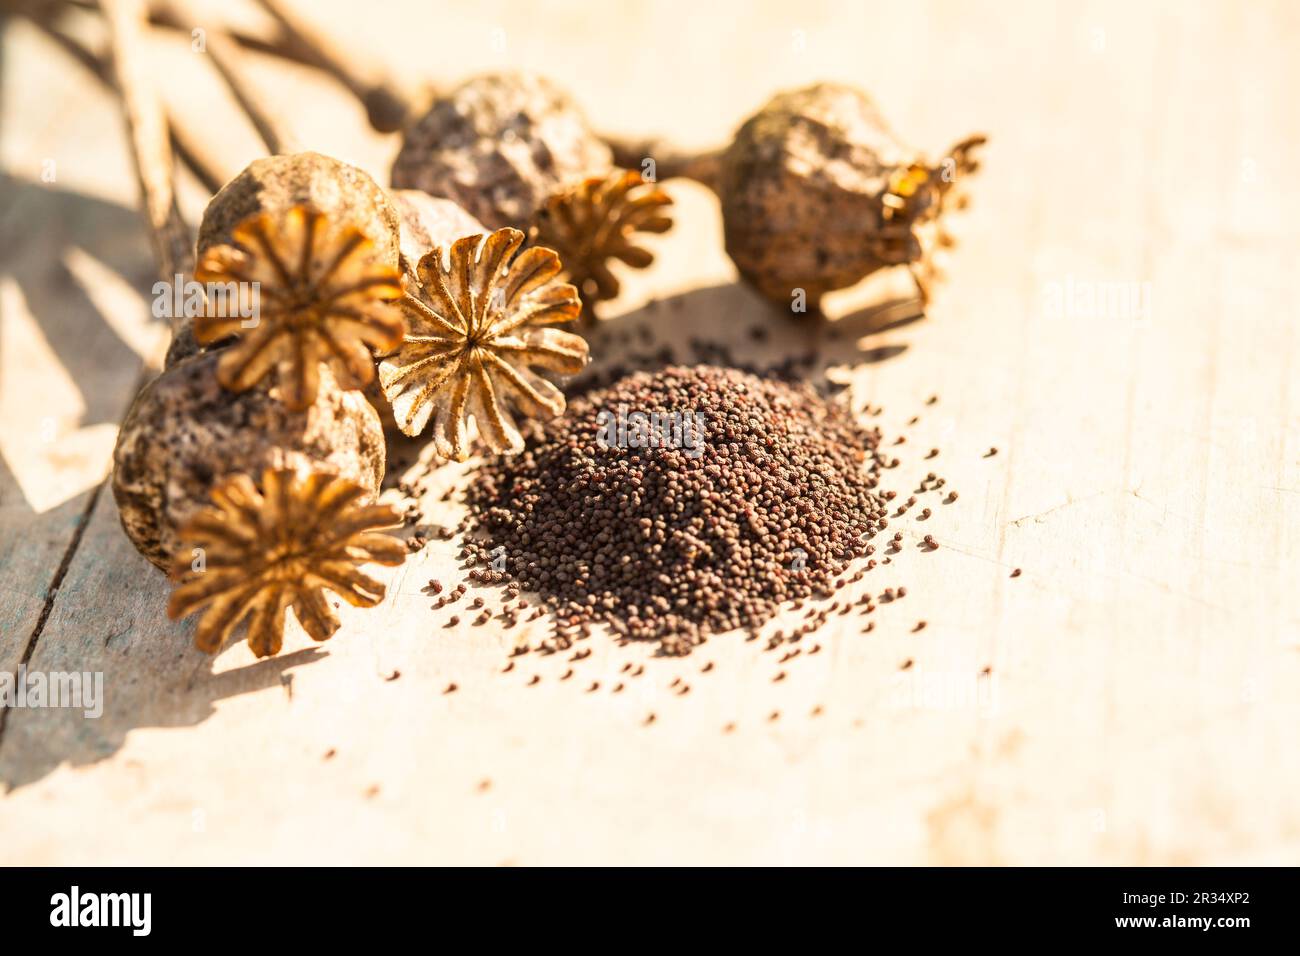 poppy seeds heap and dry flowers on the table Stock Photo